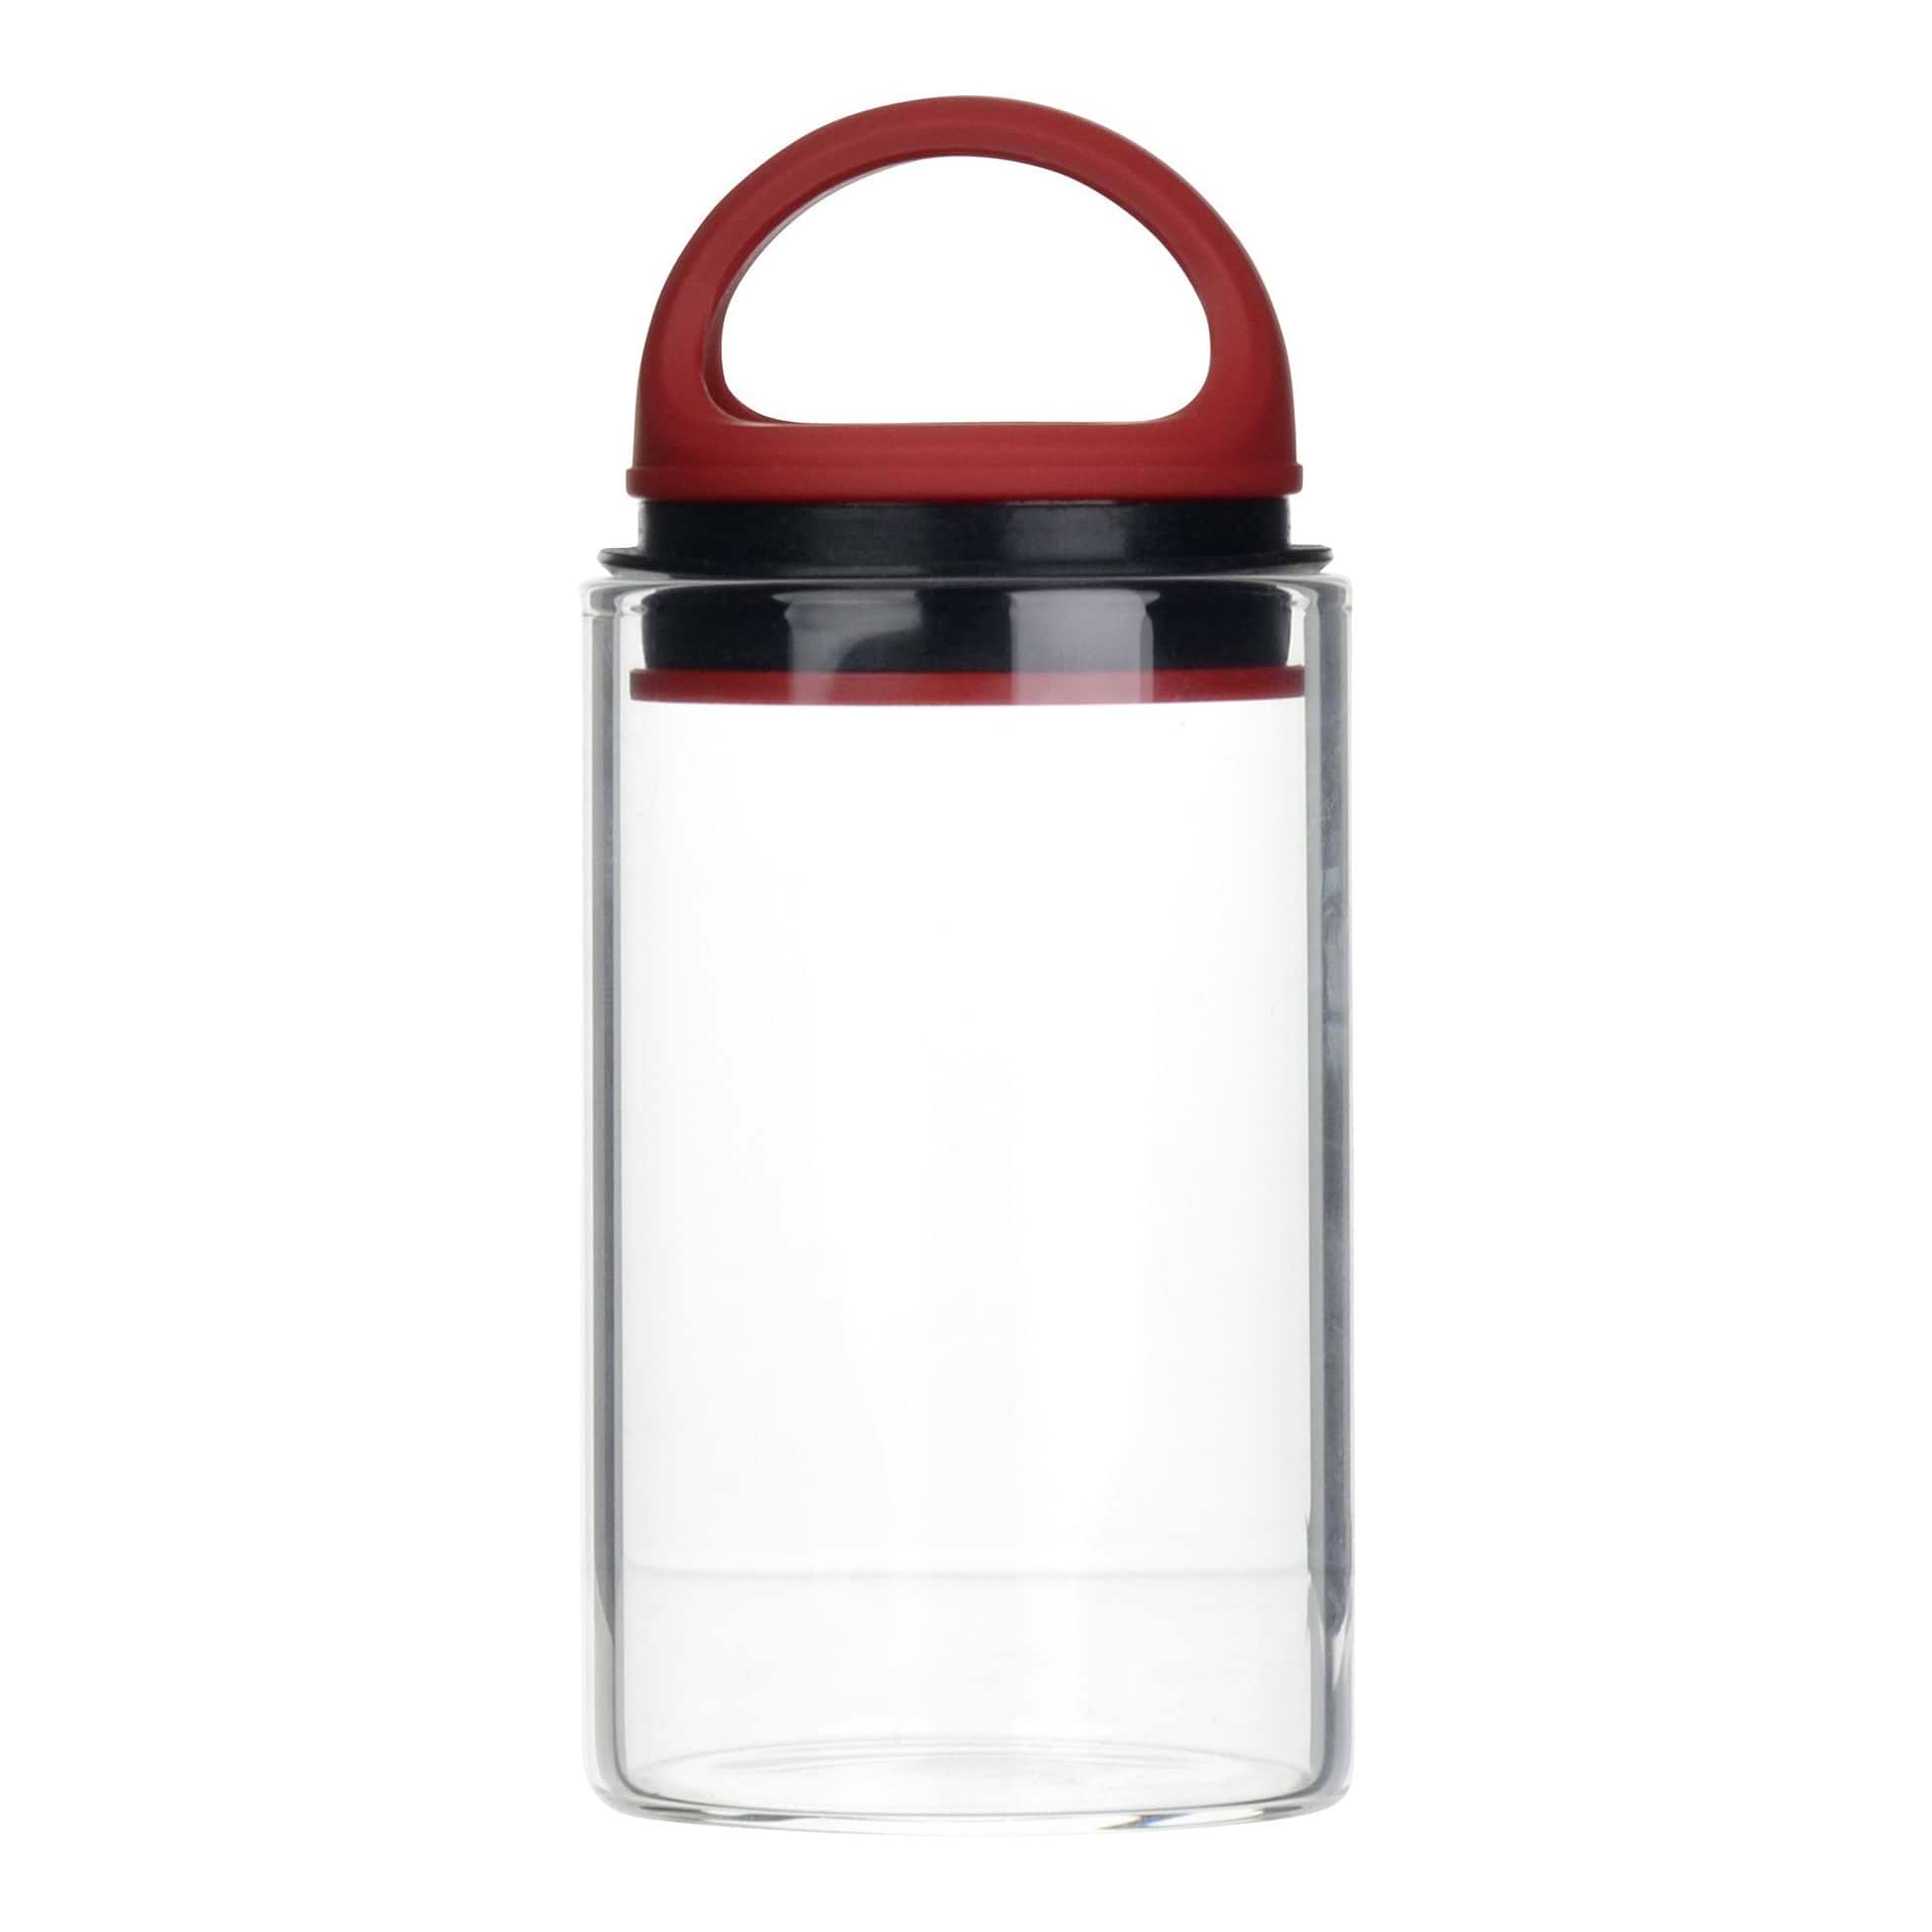 Red clear glass stash jar storage container vacuum seal easy-to-carry with curved handle